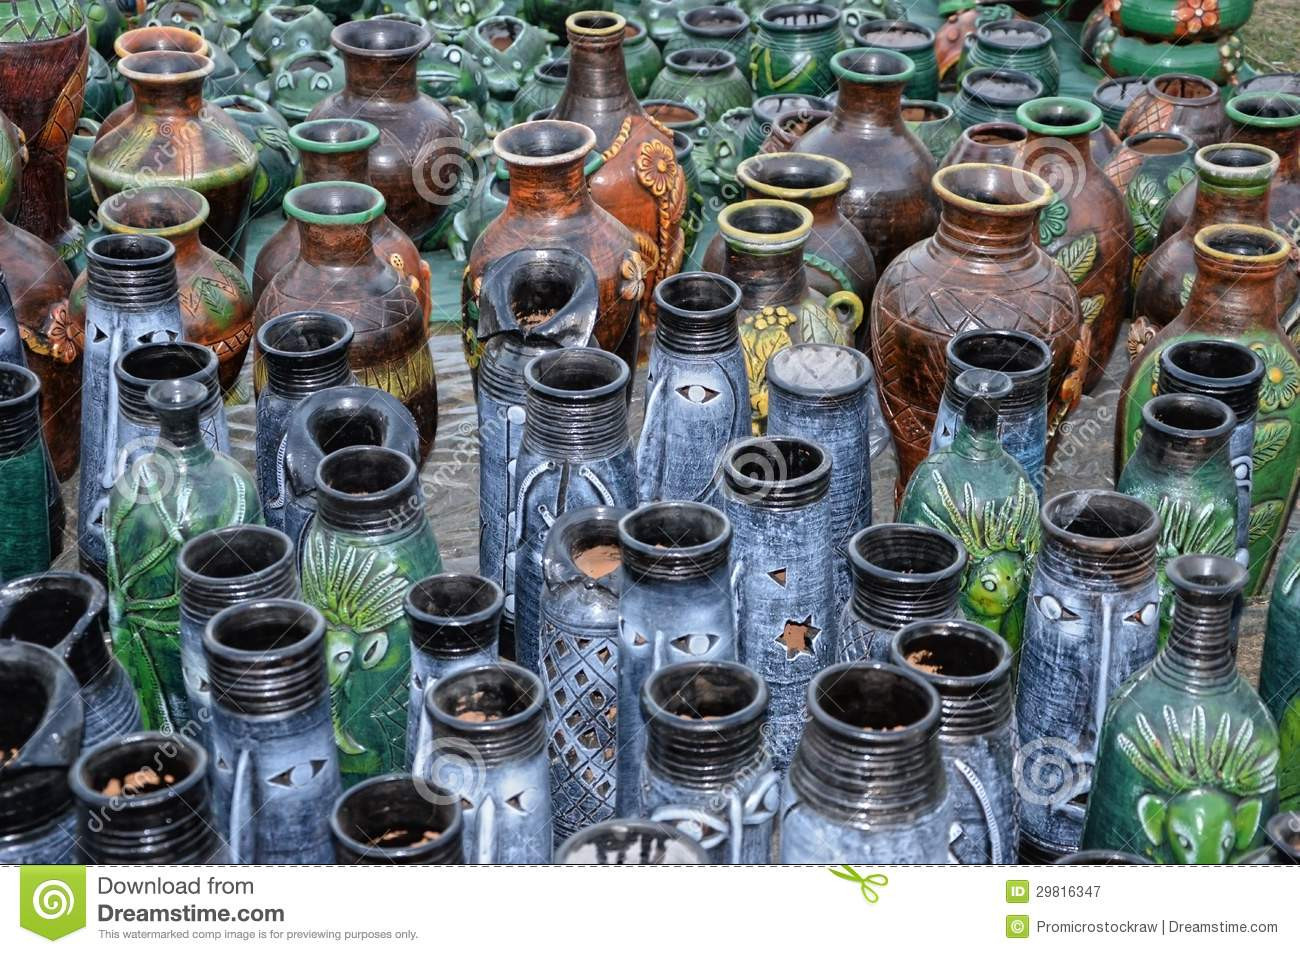 22 Lovely Wine Bottle Vases for Sale 2024 free download wine bottle vases for sale of flower vase of ceramic and clay stock image image of vibrant folk with regard to download flower vase of ceramic and clay stock image image of vibrant folk